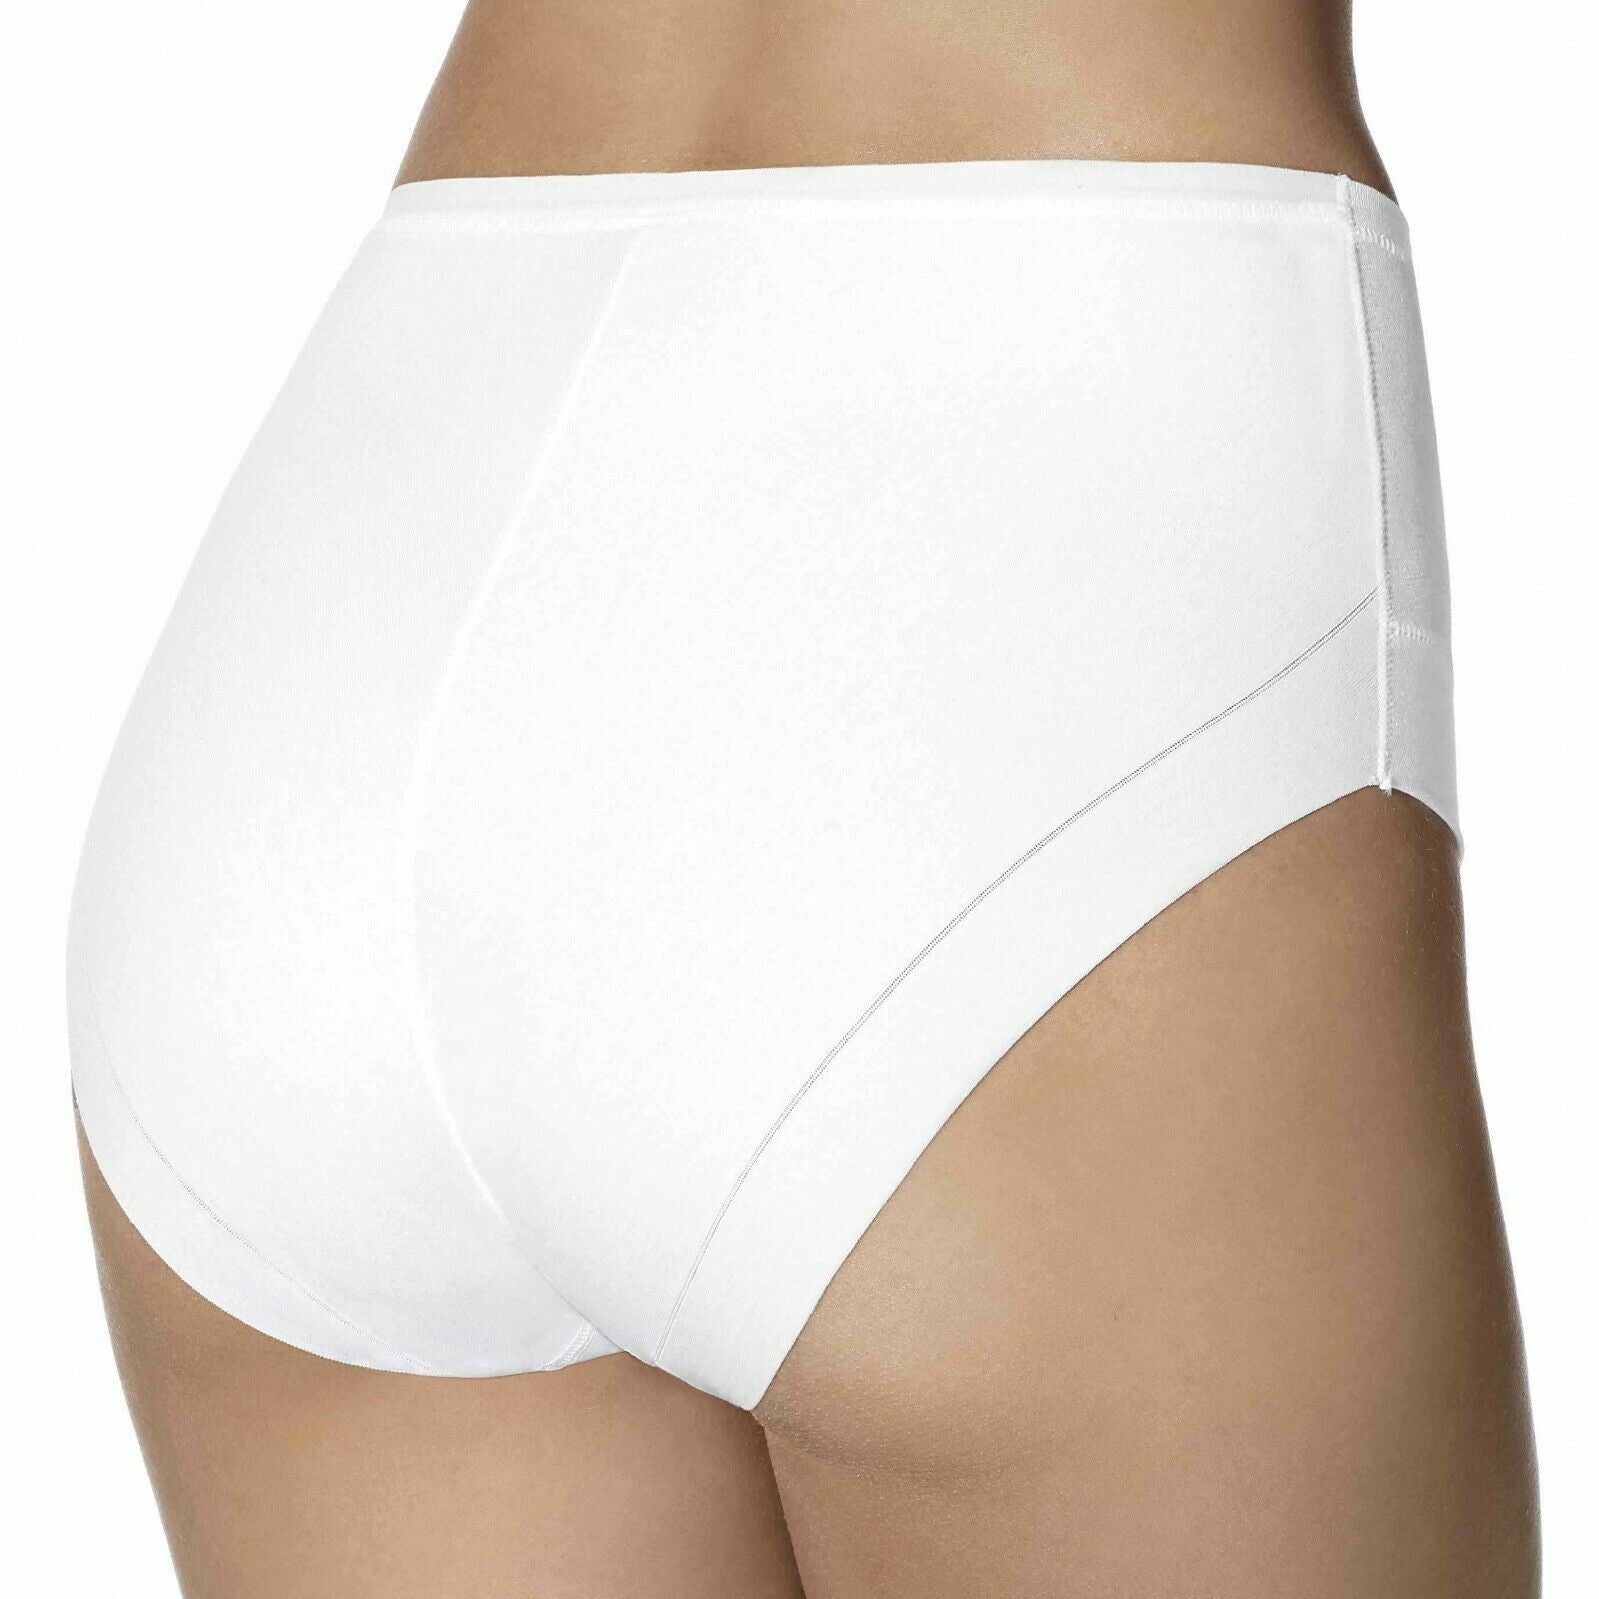 Janira Ladies Full Briefs - Active Day Pant Knickers - Gym Pants